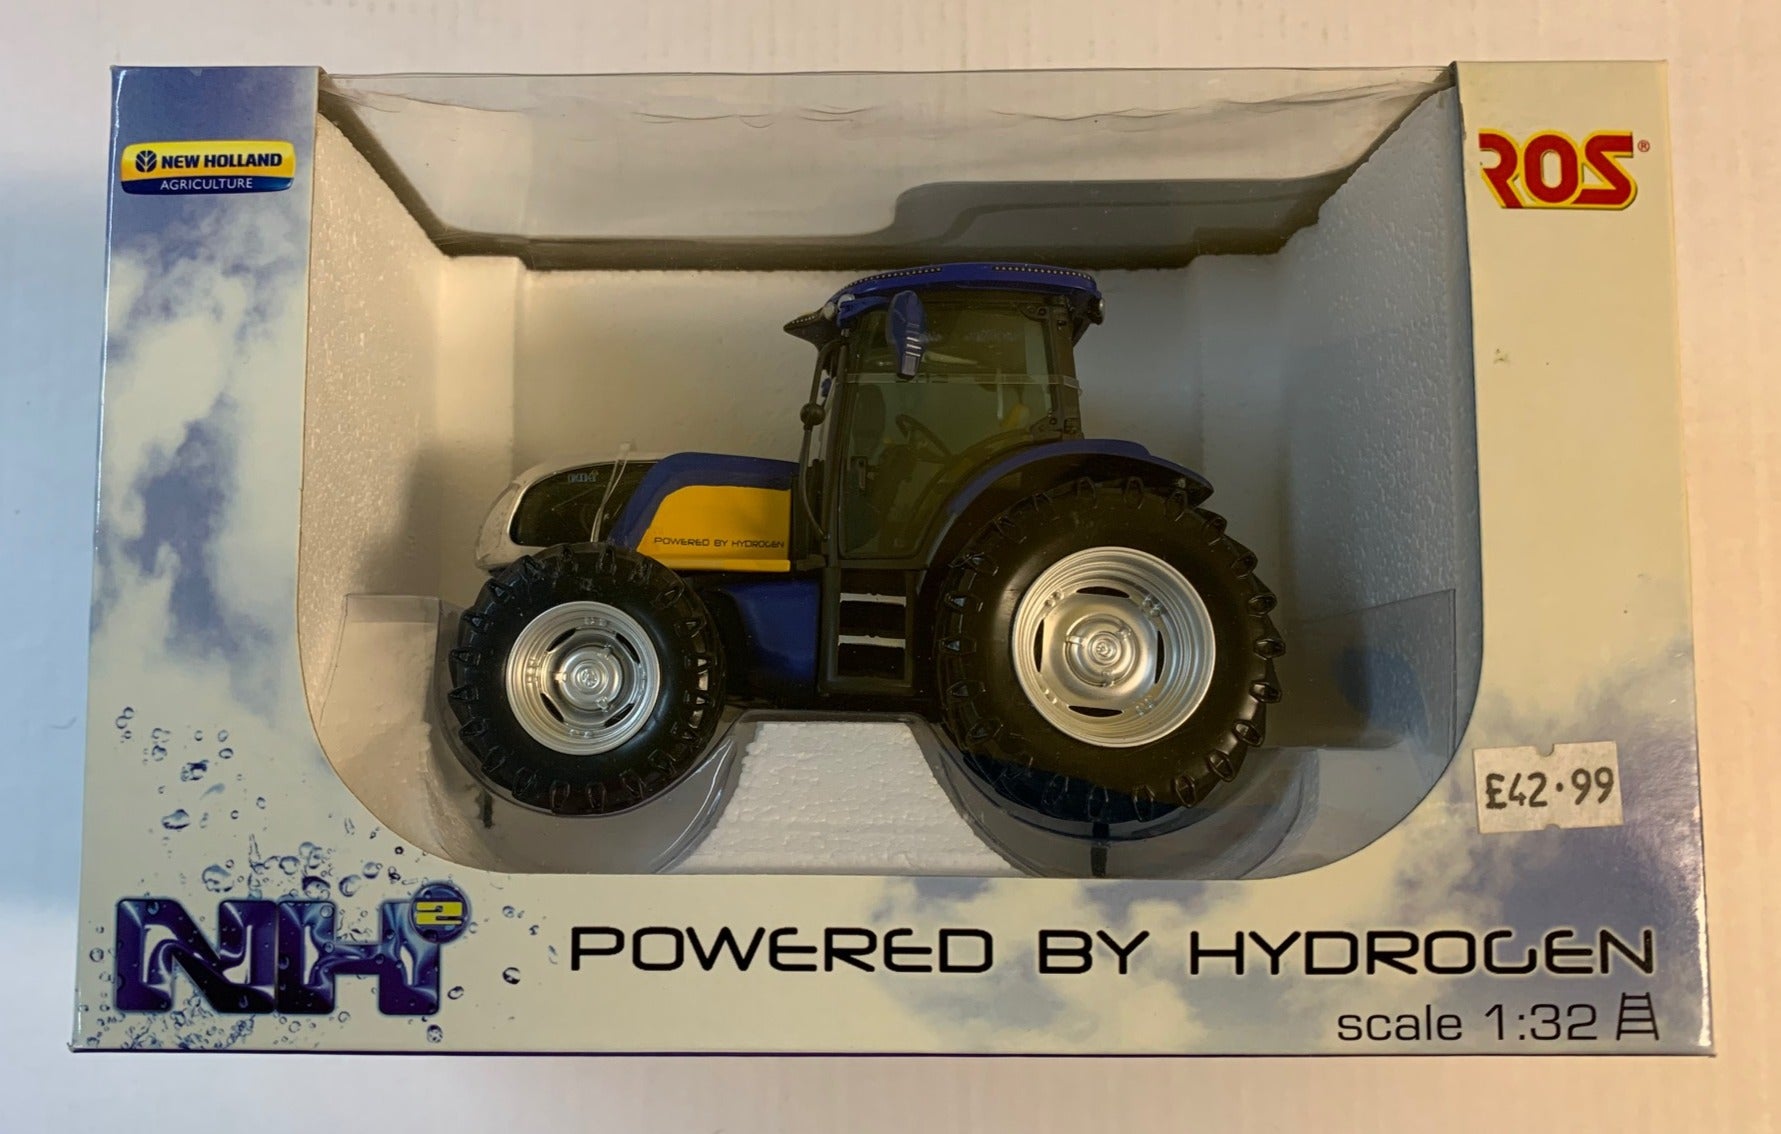 ROS NEW HOLLAND POWERED BY HYDROGEN 